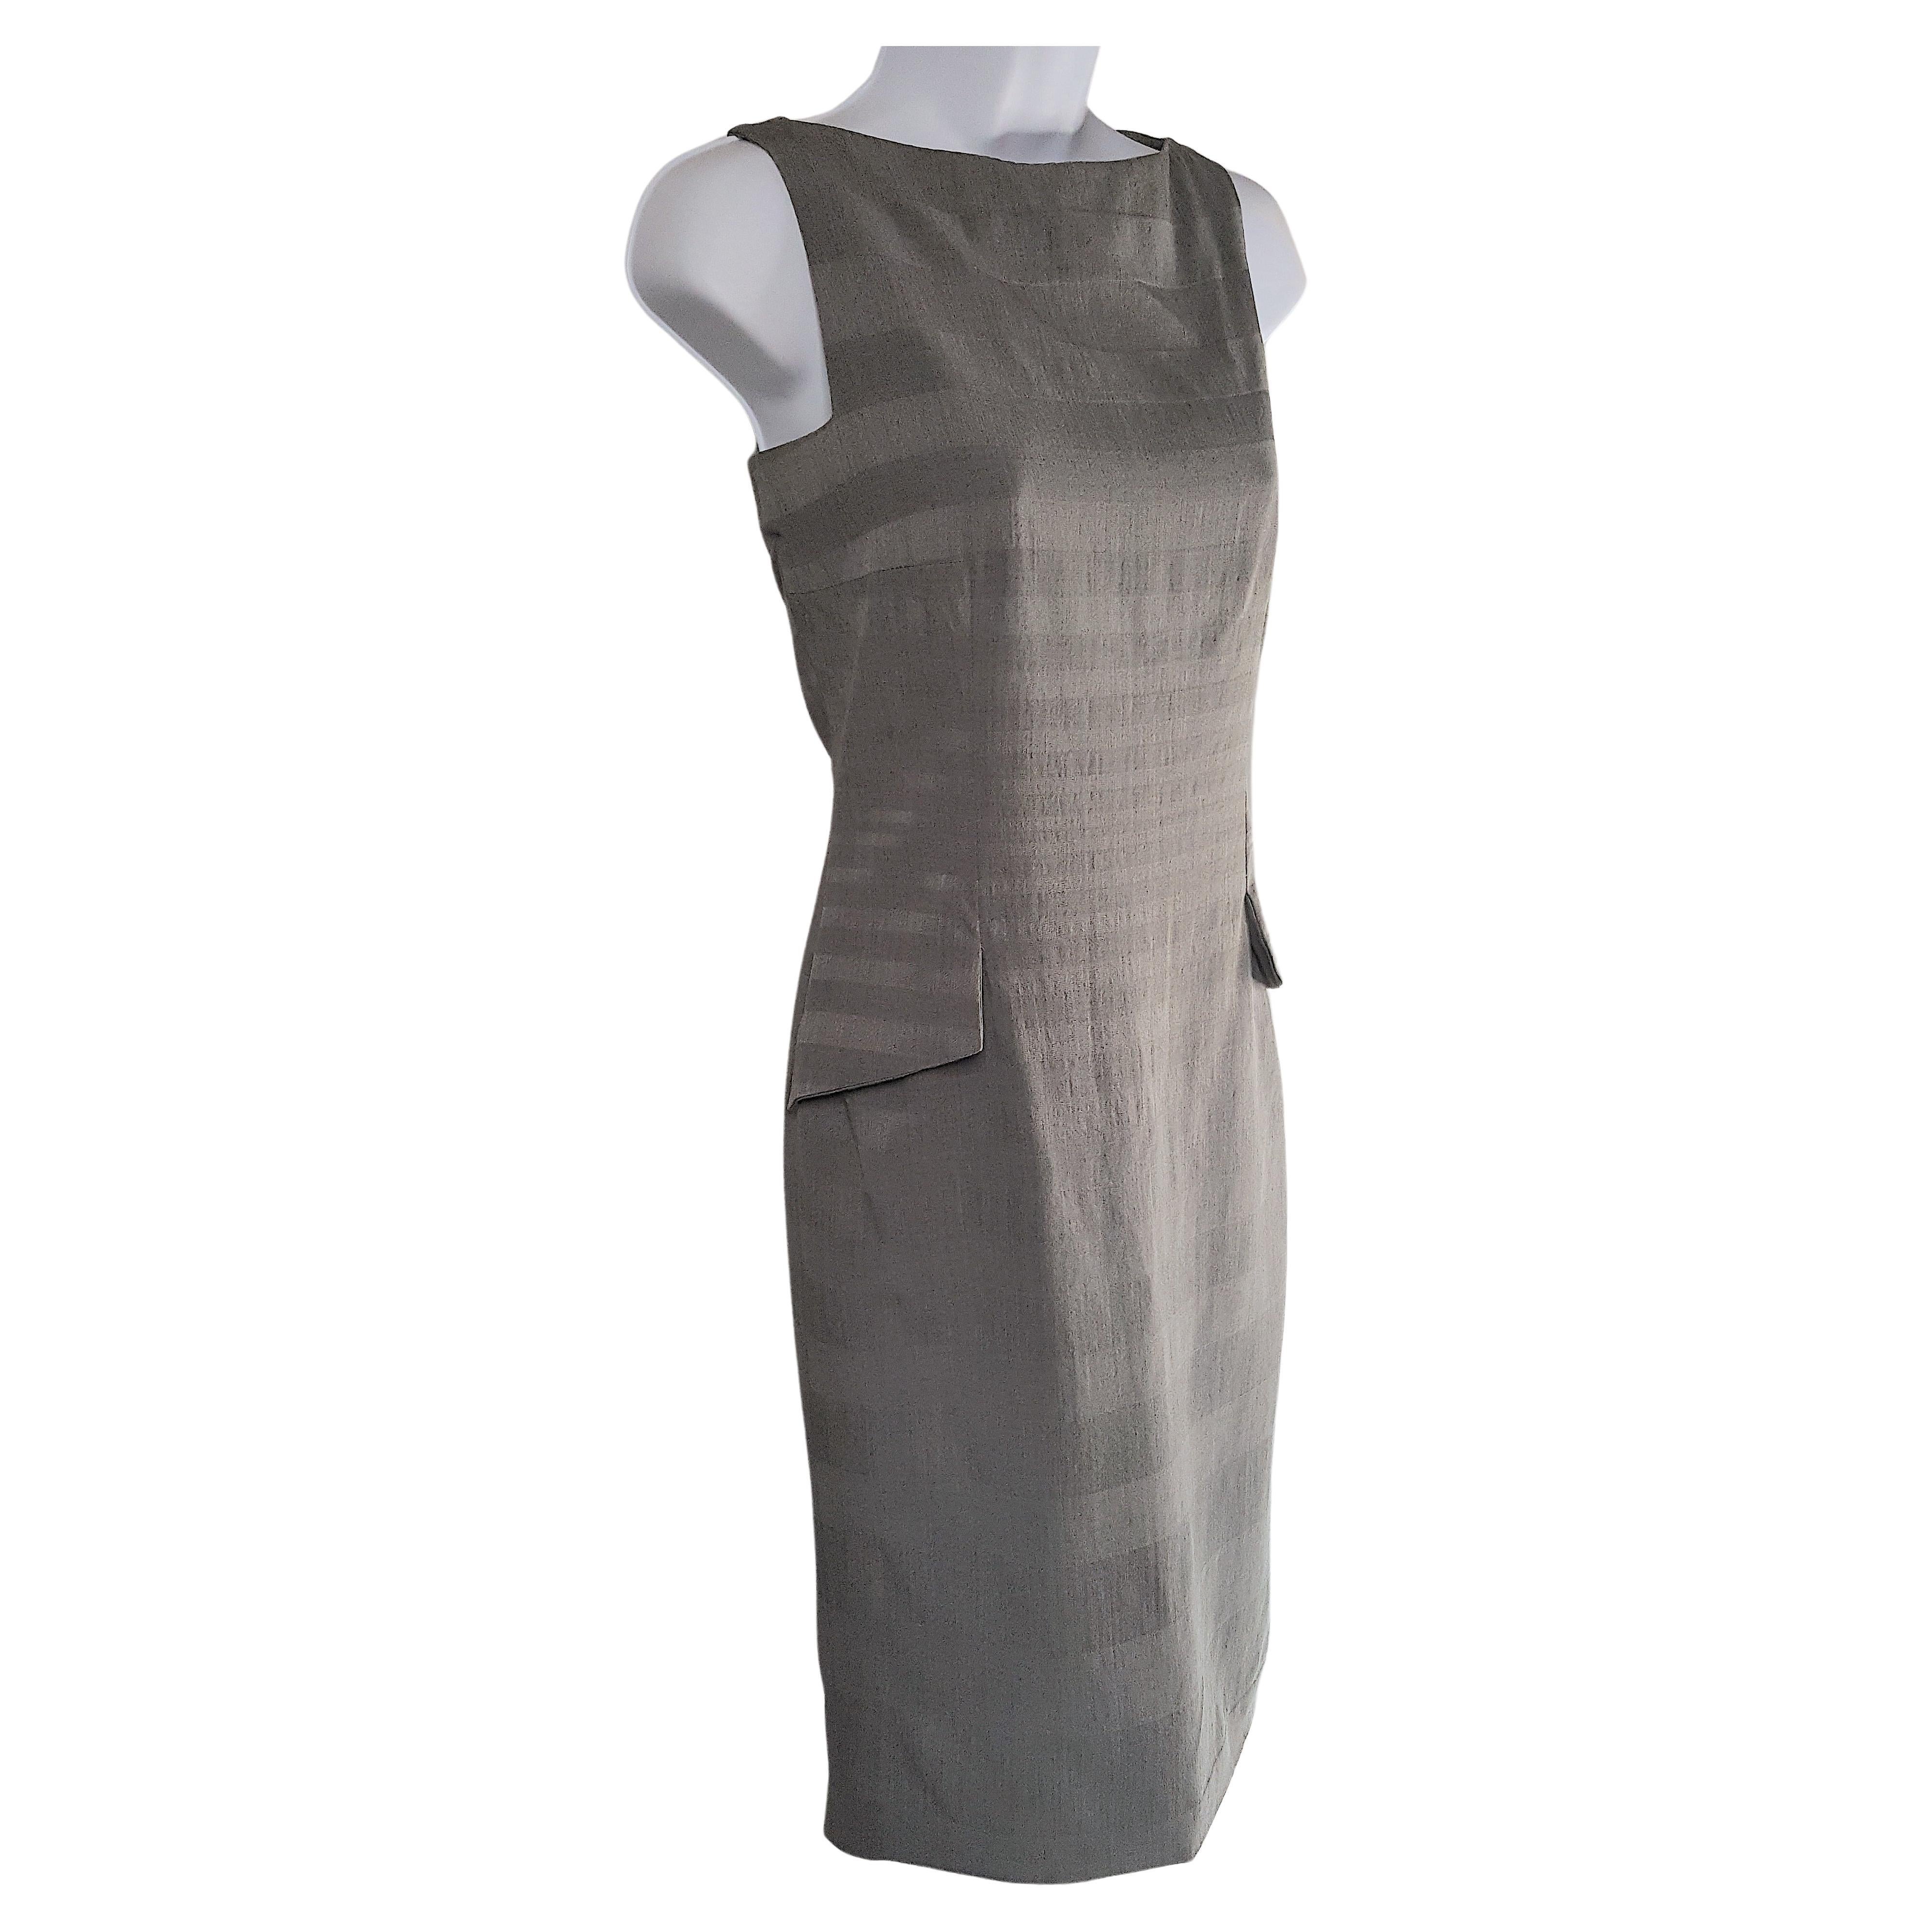 Acquired from the French flagship Christian Dior Boutique in Paris when John Galliano was its artistic director of both haute couture and ready-to-wear, he designed this hip-accentuating bateaux-neck sleeveless sheath dress with characteristic tiny